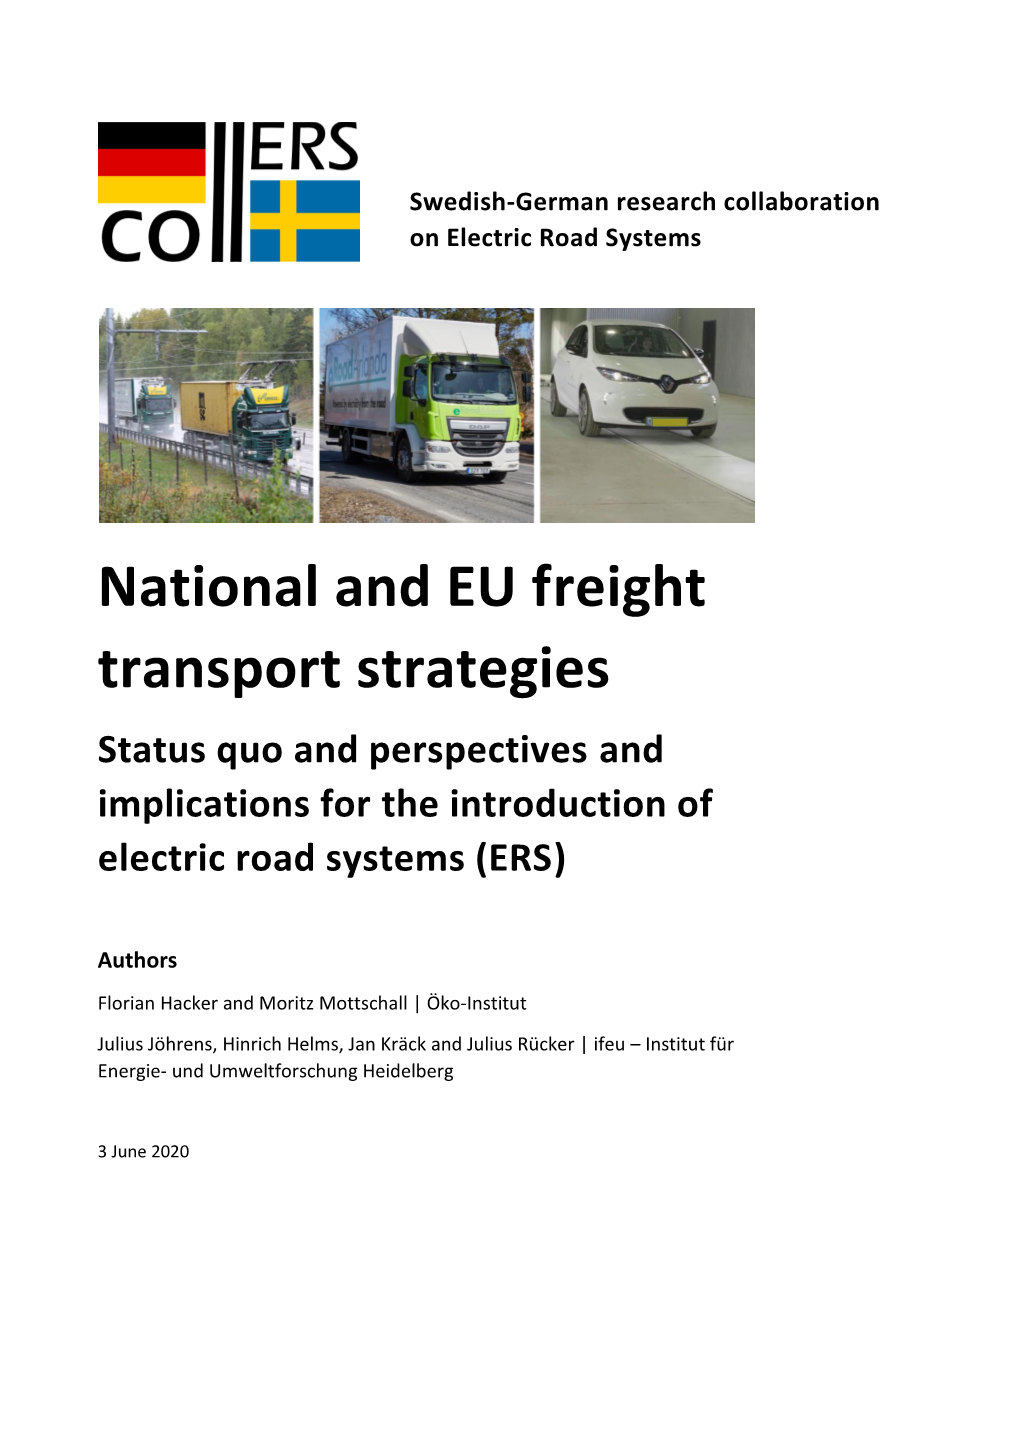 National and EU Freight Transport Strategies Status Quo and Perspectives and Implications for the Introduction of Electric Road Systems (ERS)